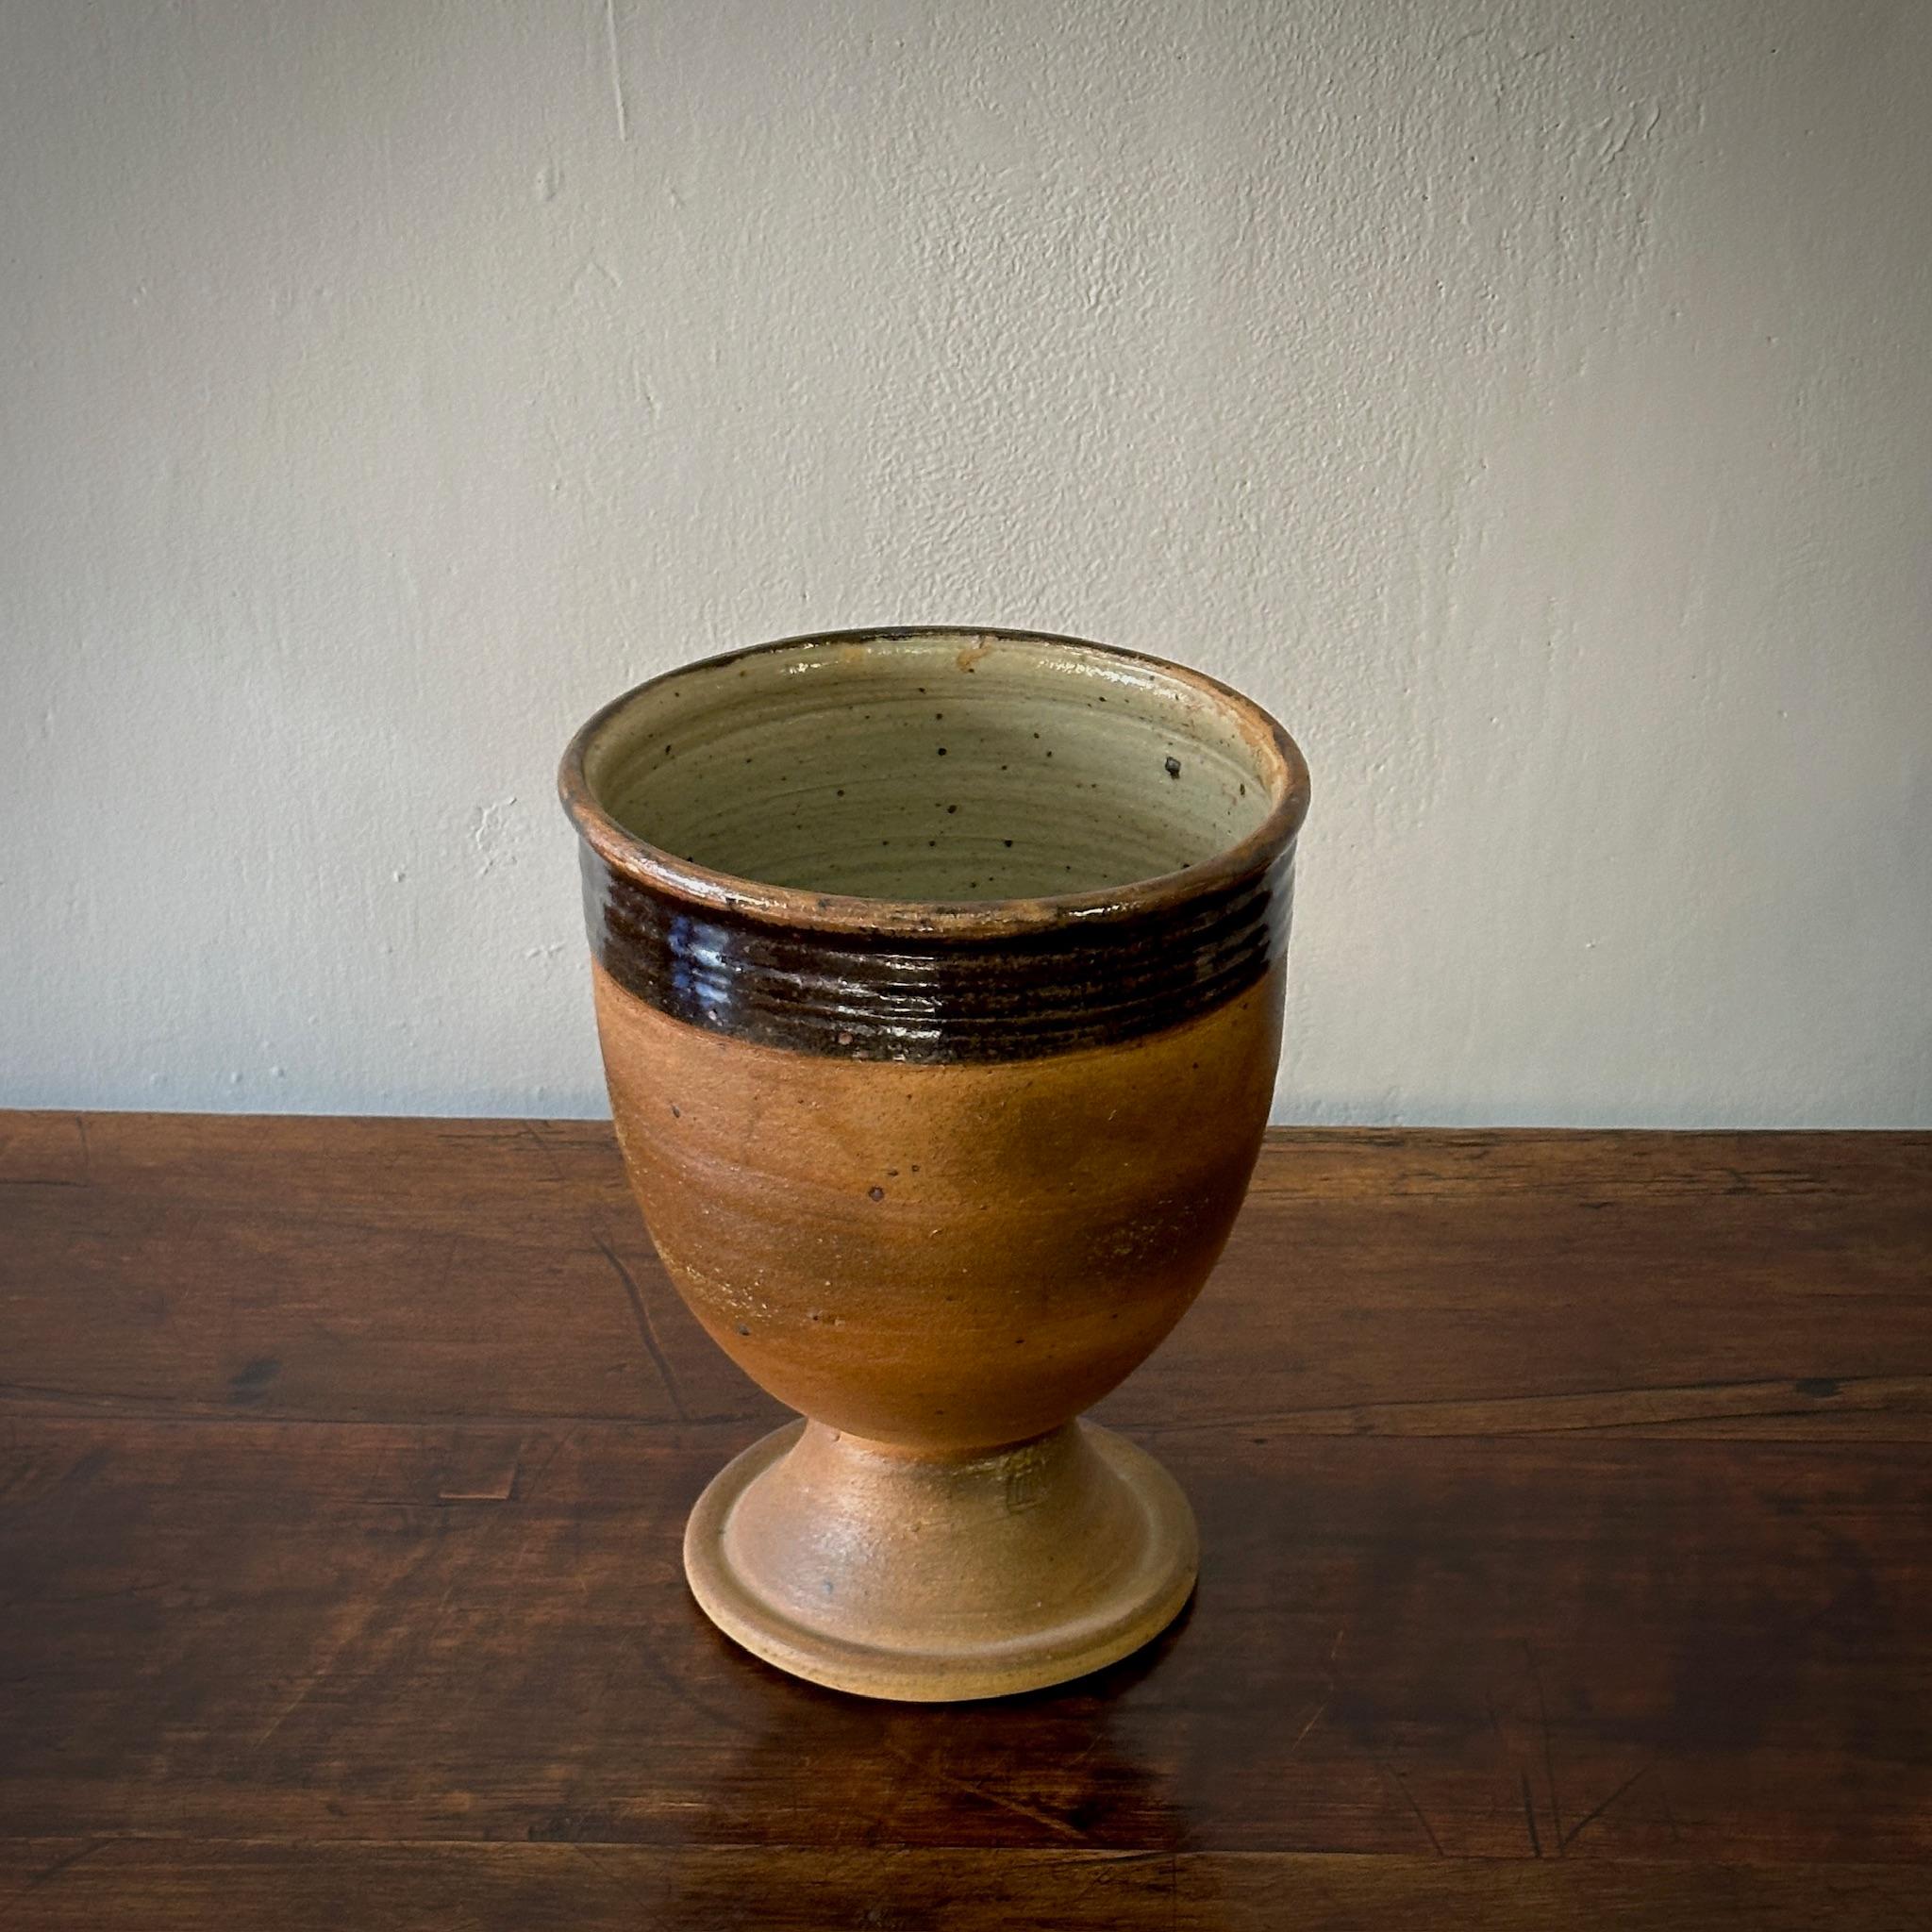 1960s earth-toned glazed ceramic vessel. With a blend of matte and a brown glazed banding, this vessel is defined by a refined rusticity.

France, circa 1960

Dimensions: 10W x 10D x 13H